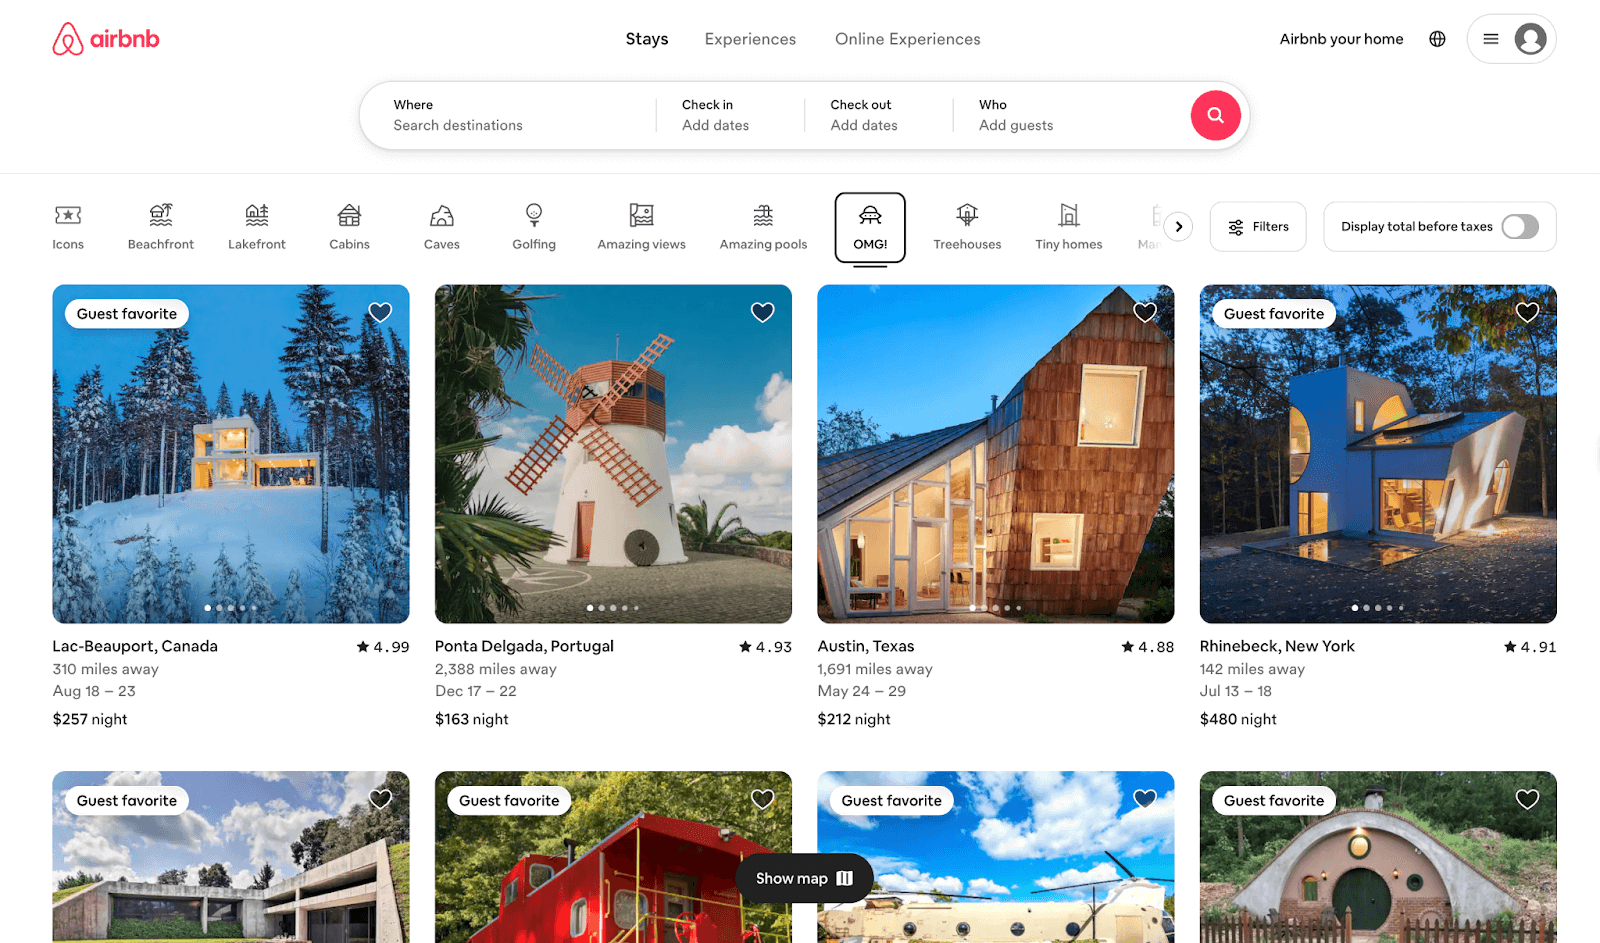 A screenshot of unique Airbnb options under the "OMG!" tab.